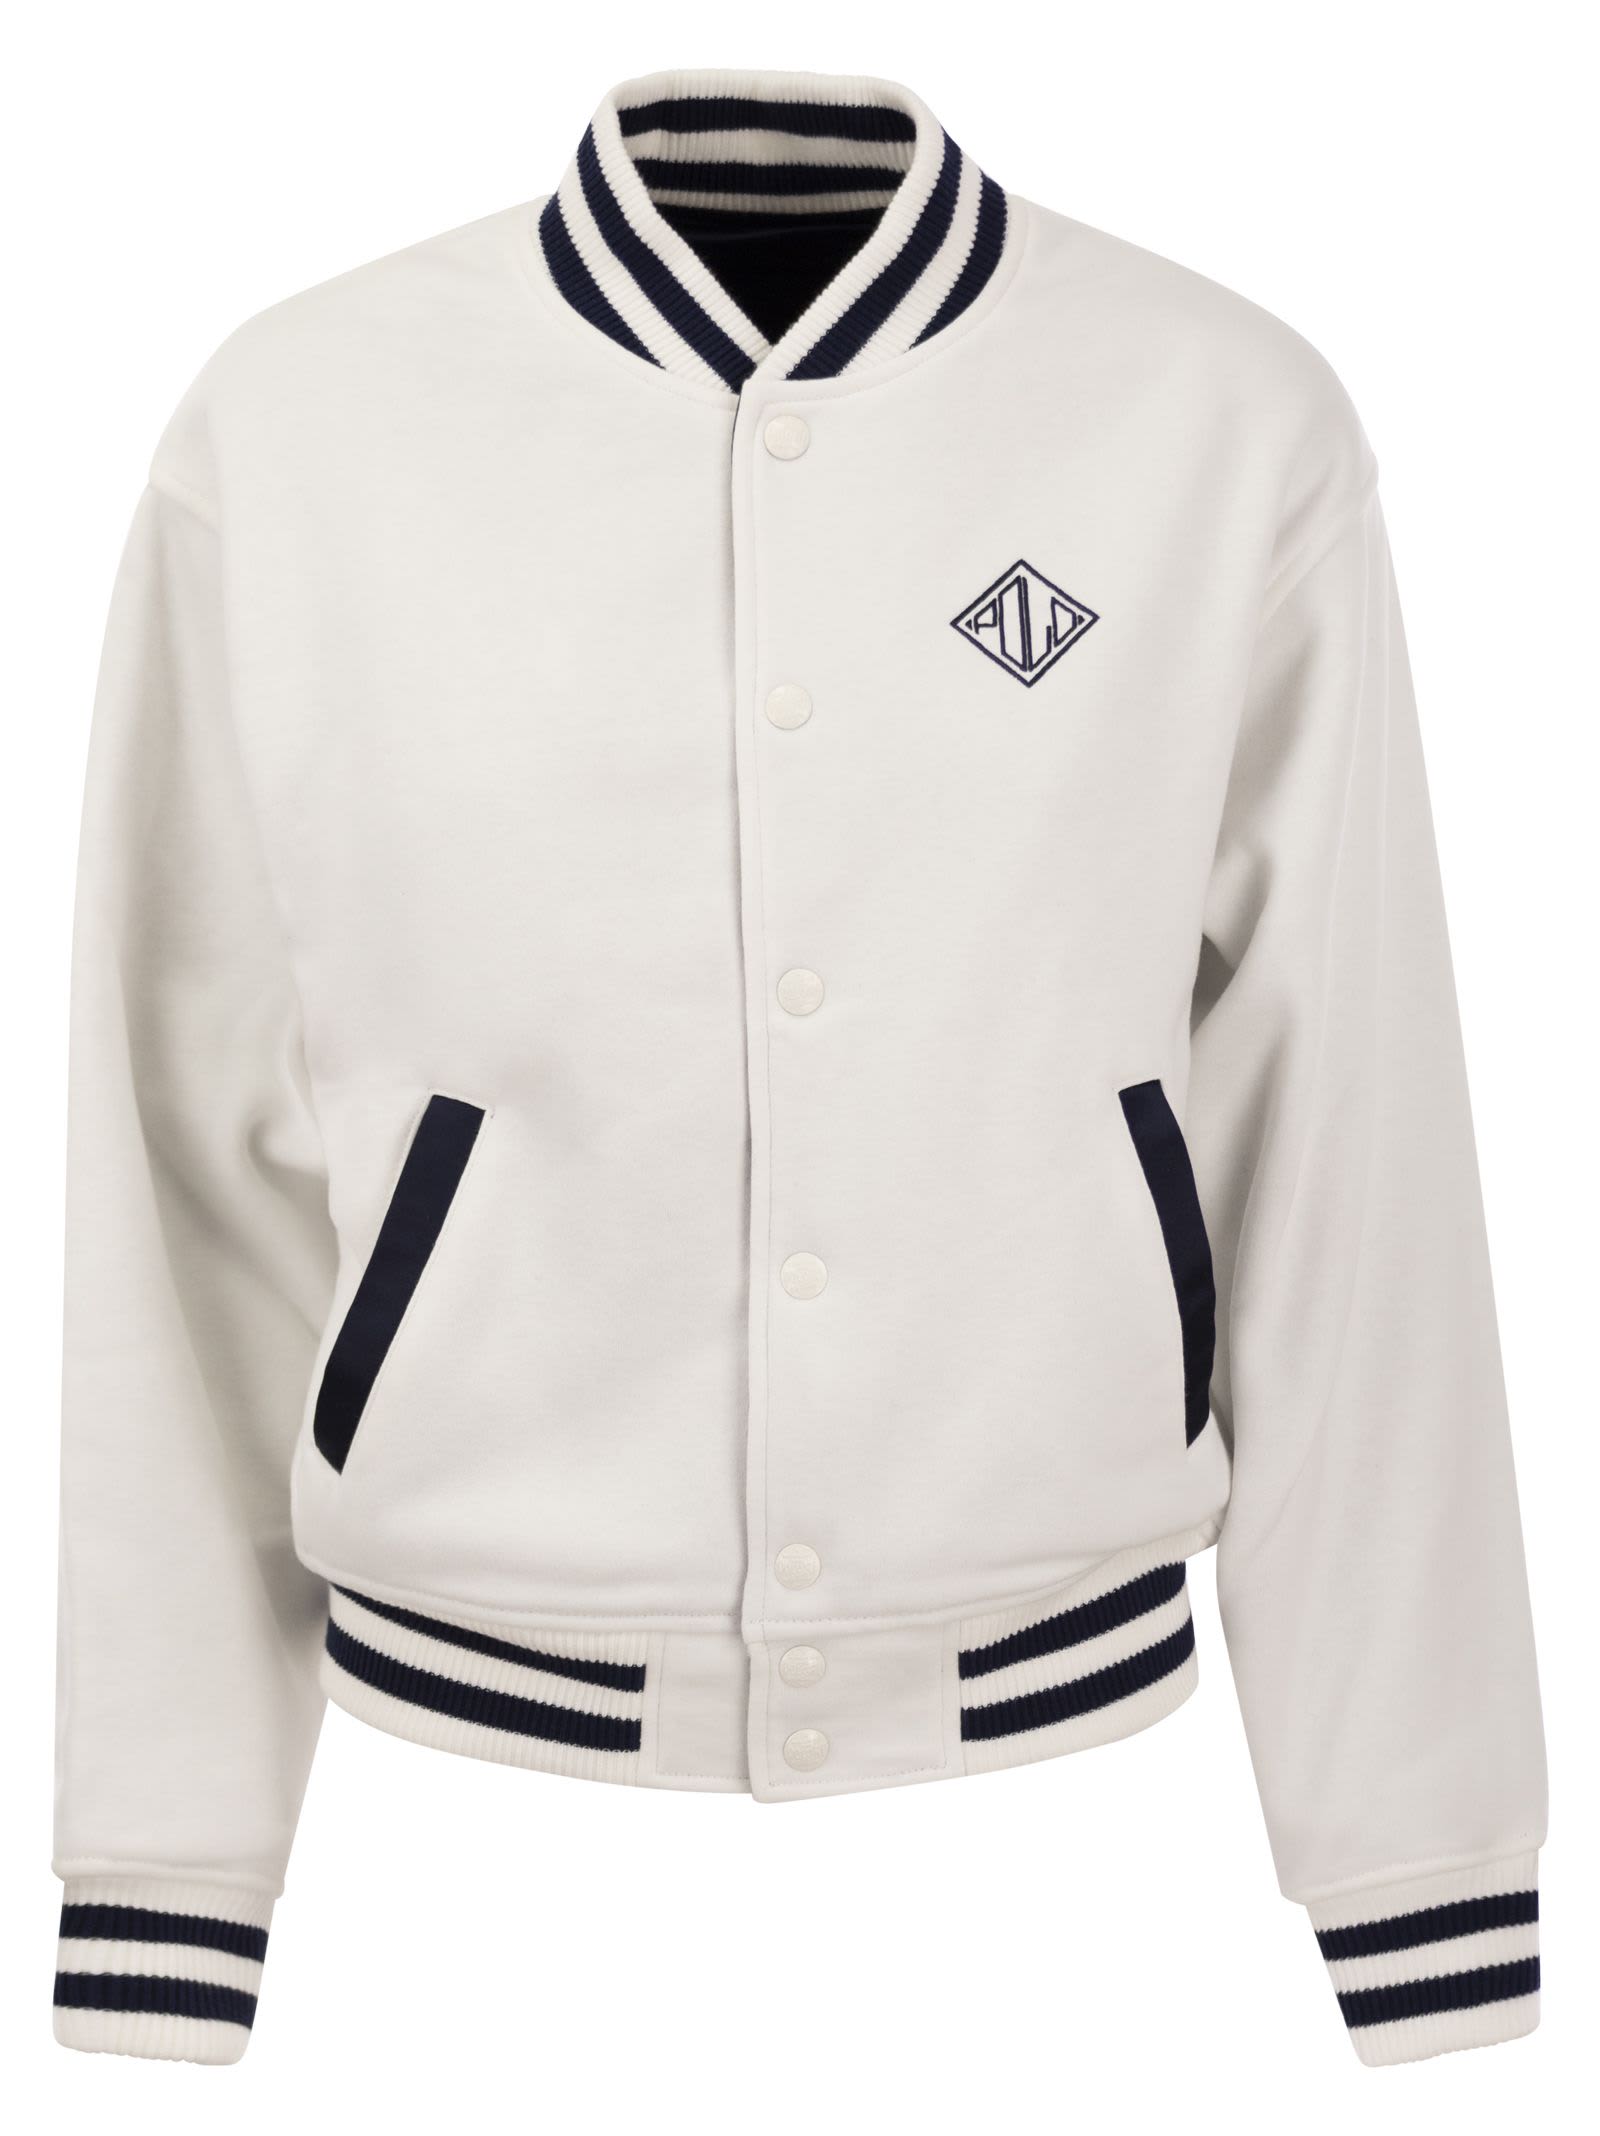 POLO RALPH LAUREN DOUBLE-SIDED BOMBER JACKET WITH RL LOGO